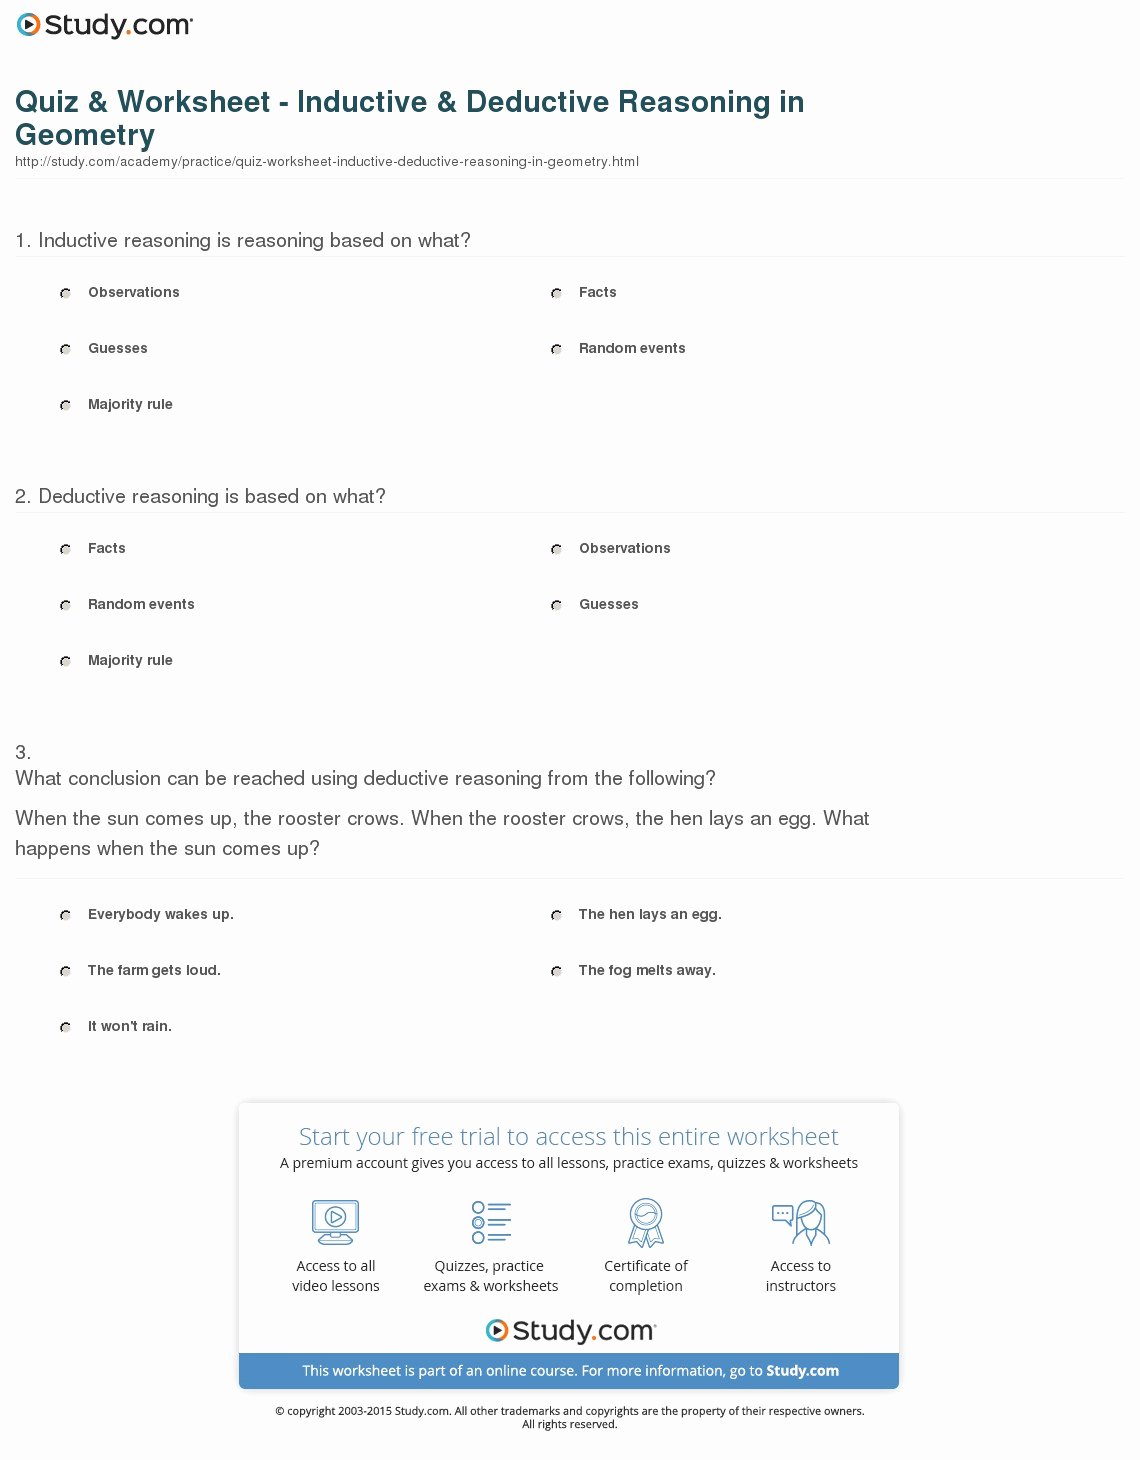 Inductive and Deductive Reasoning Worksheet Lovely Quiz &amp; Worksheet Inductive &amp; Deductive Reasoning In